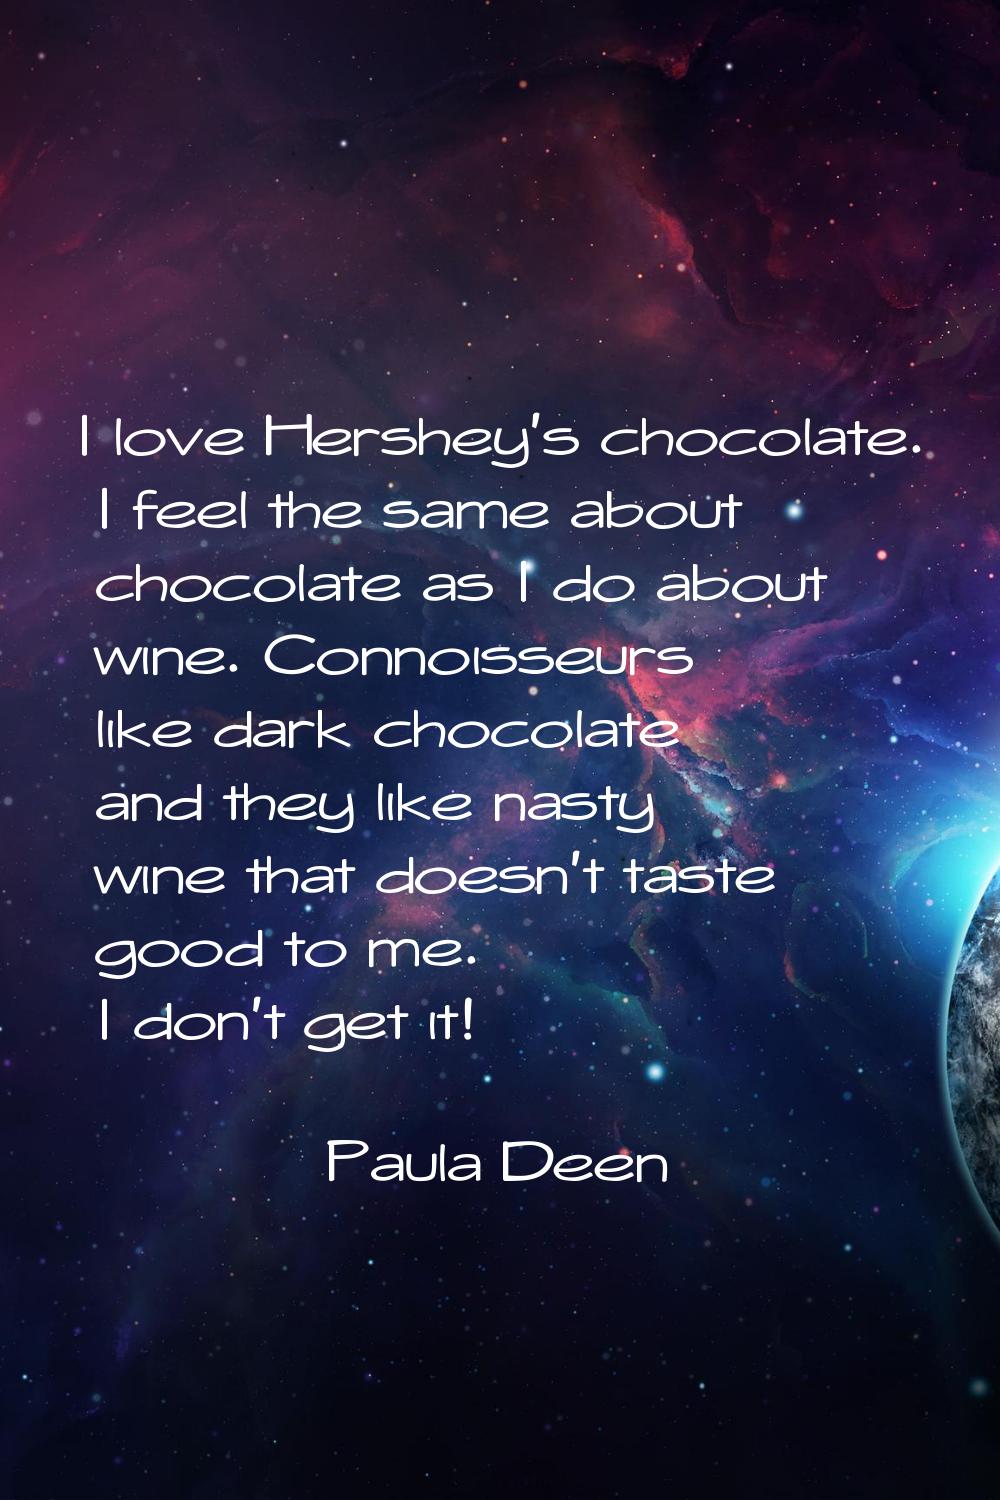 I love Hershey's chocolate. I feel the same about chocolate as I do about wine. Connoisseurs like d